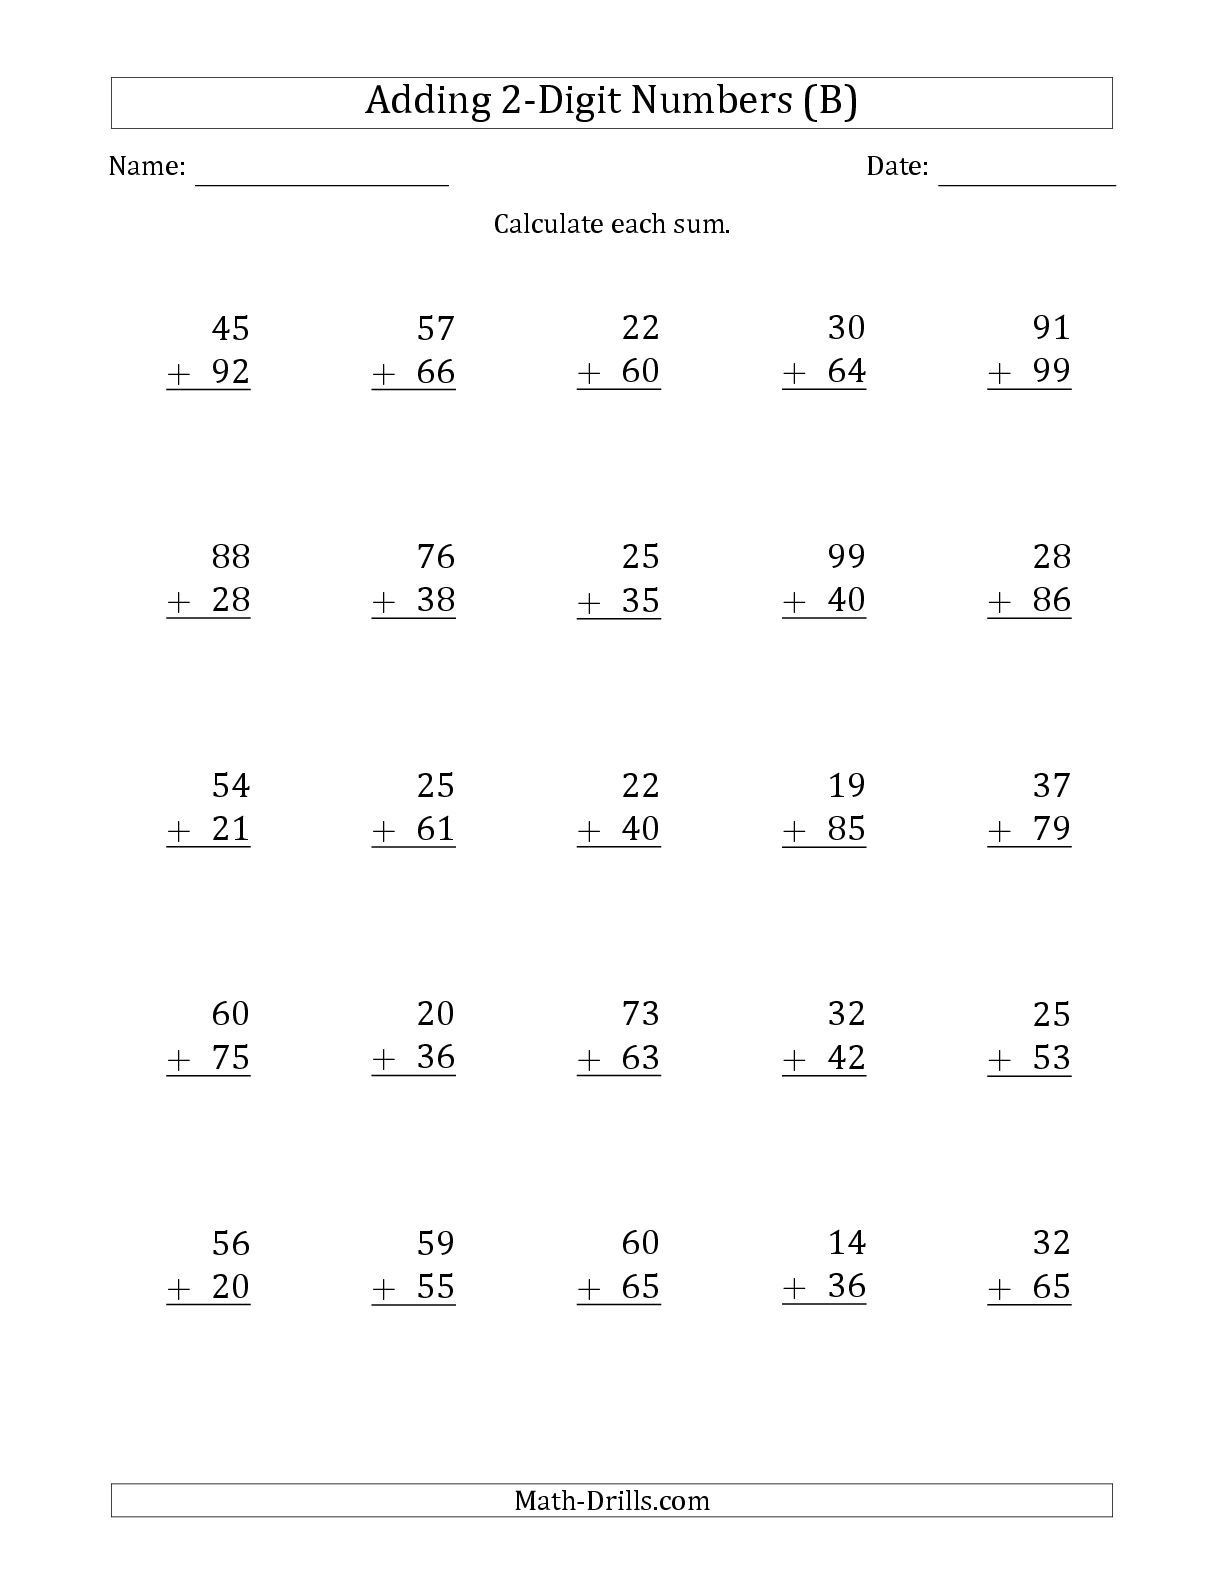 Free Math Worksheets First Grade 1 Place Value Adding whole Tens and Ones Missing Addend